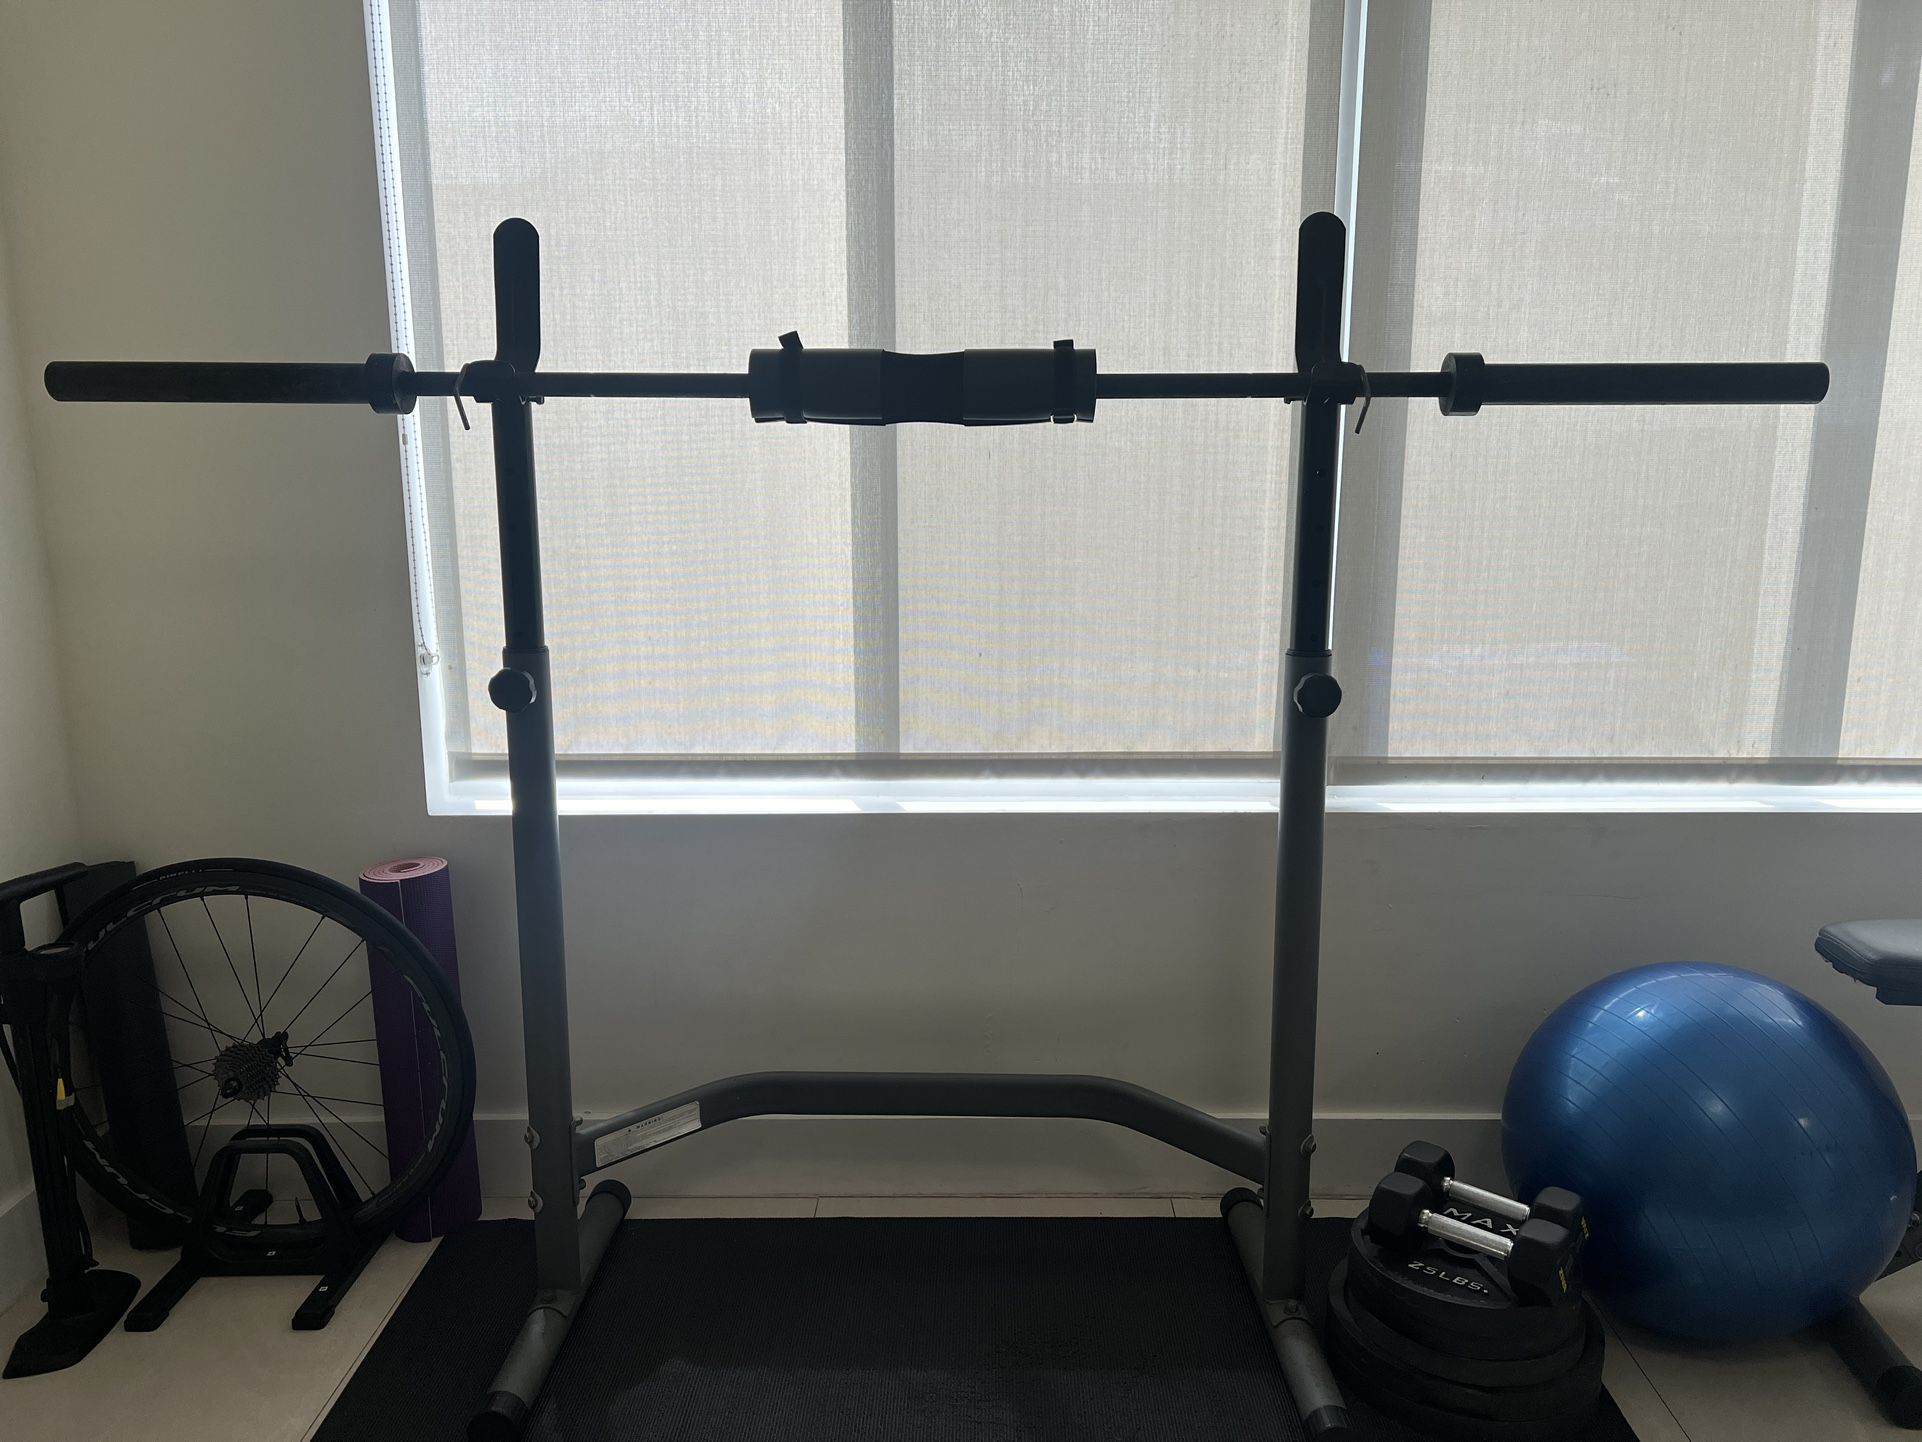 Standard Weight Bench, Bench Press Set - Home Gym Full-Body Workout 